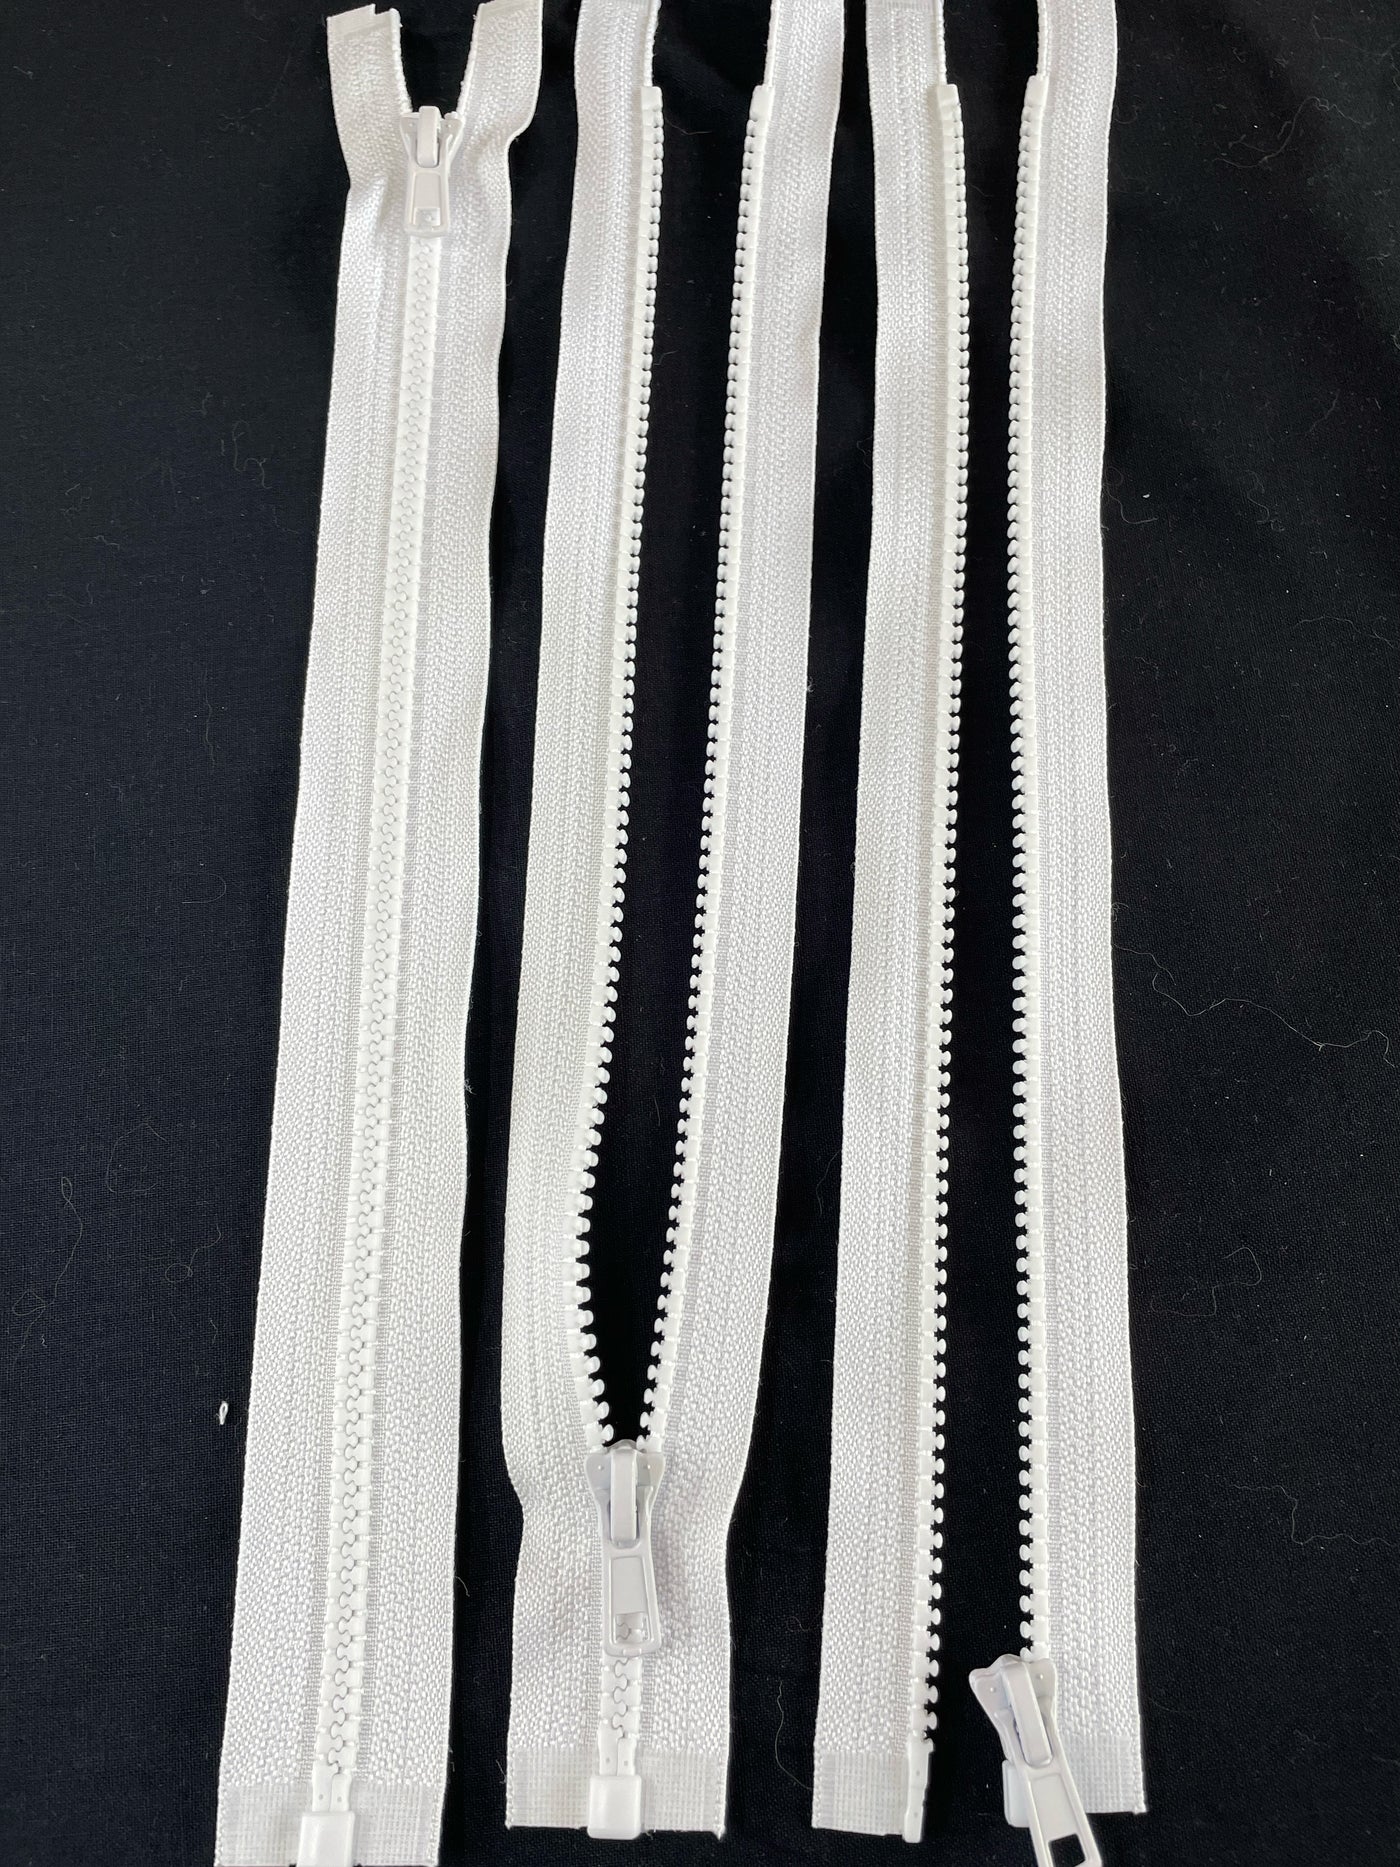 white Chunky open-ended zippers in Size 5: Robust and reliable zippers designed for heavy-duty applications. The chunky design ensures durability and strength, suitable for projects requiring sturdy closures. With open-ended functionality, they offer accessibility and ease of use for jackets, bags, and outdoor gear. Size 5 provides ample width for secure fastening, making these zippers ideal for projects that demand both style and substance.